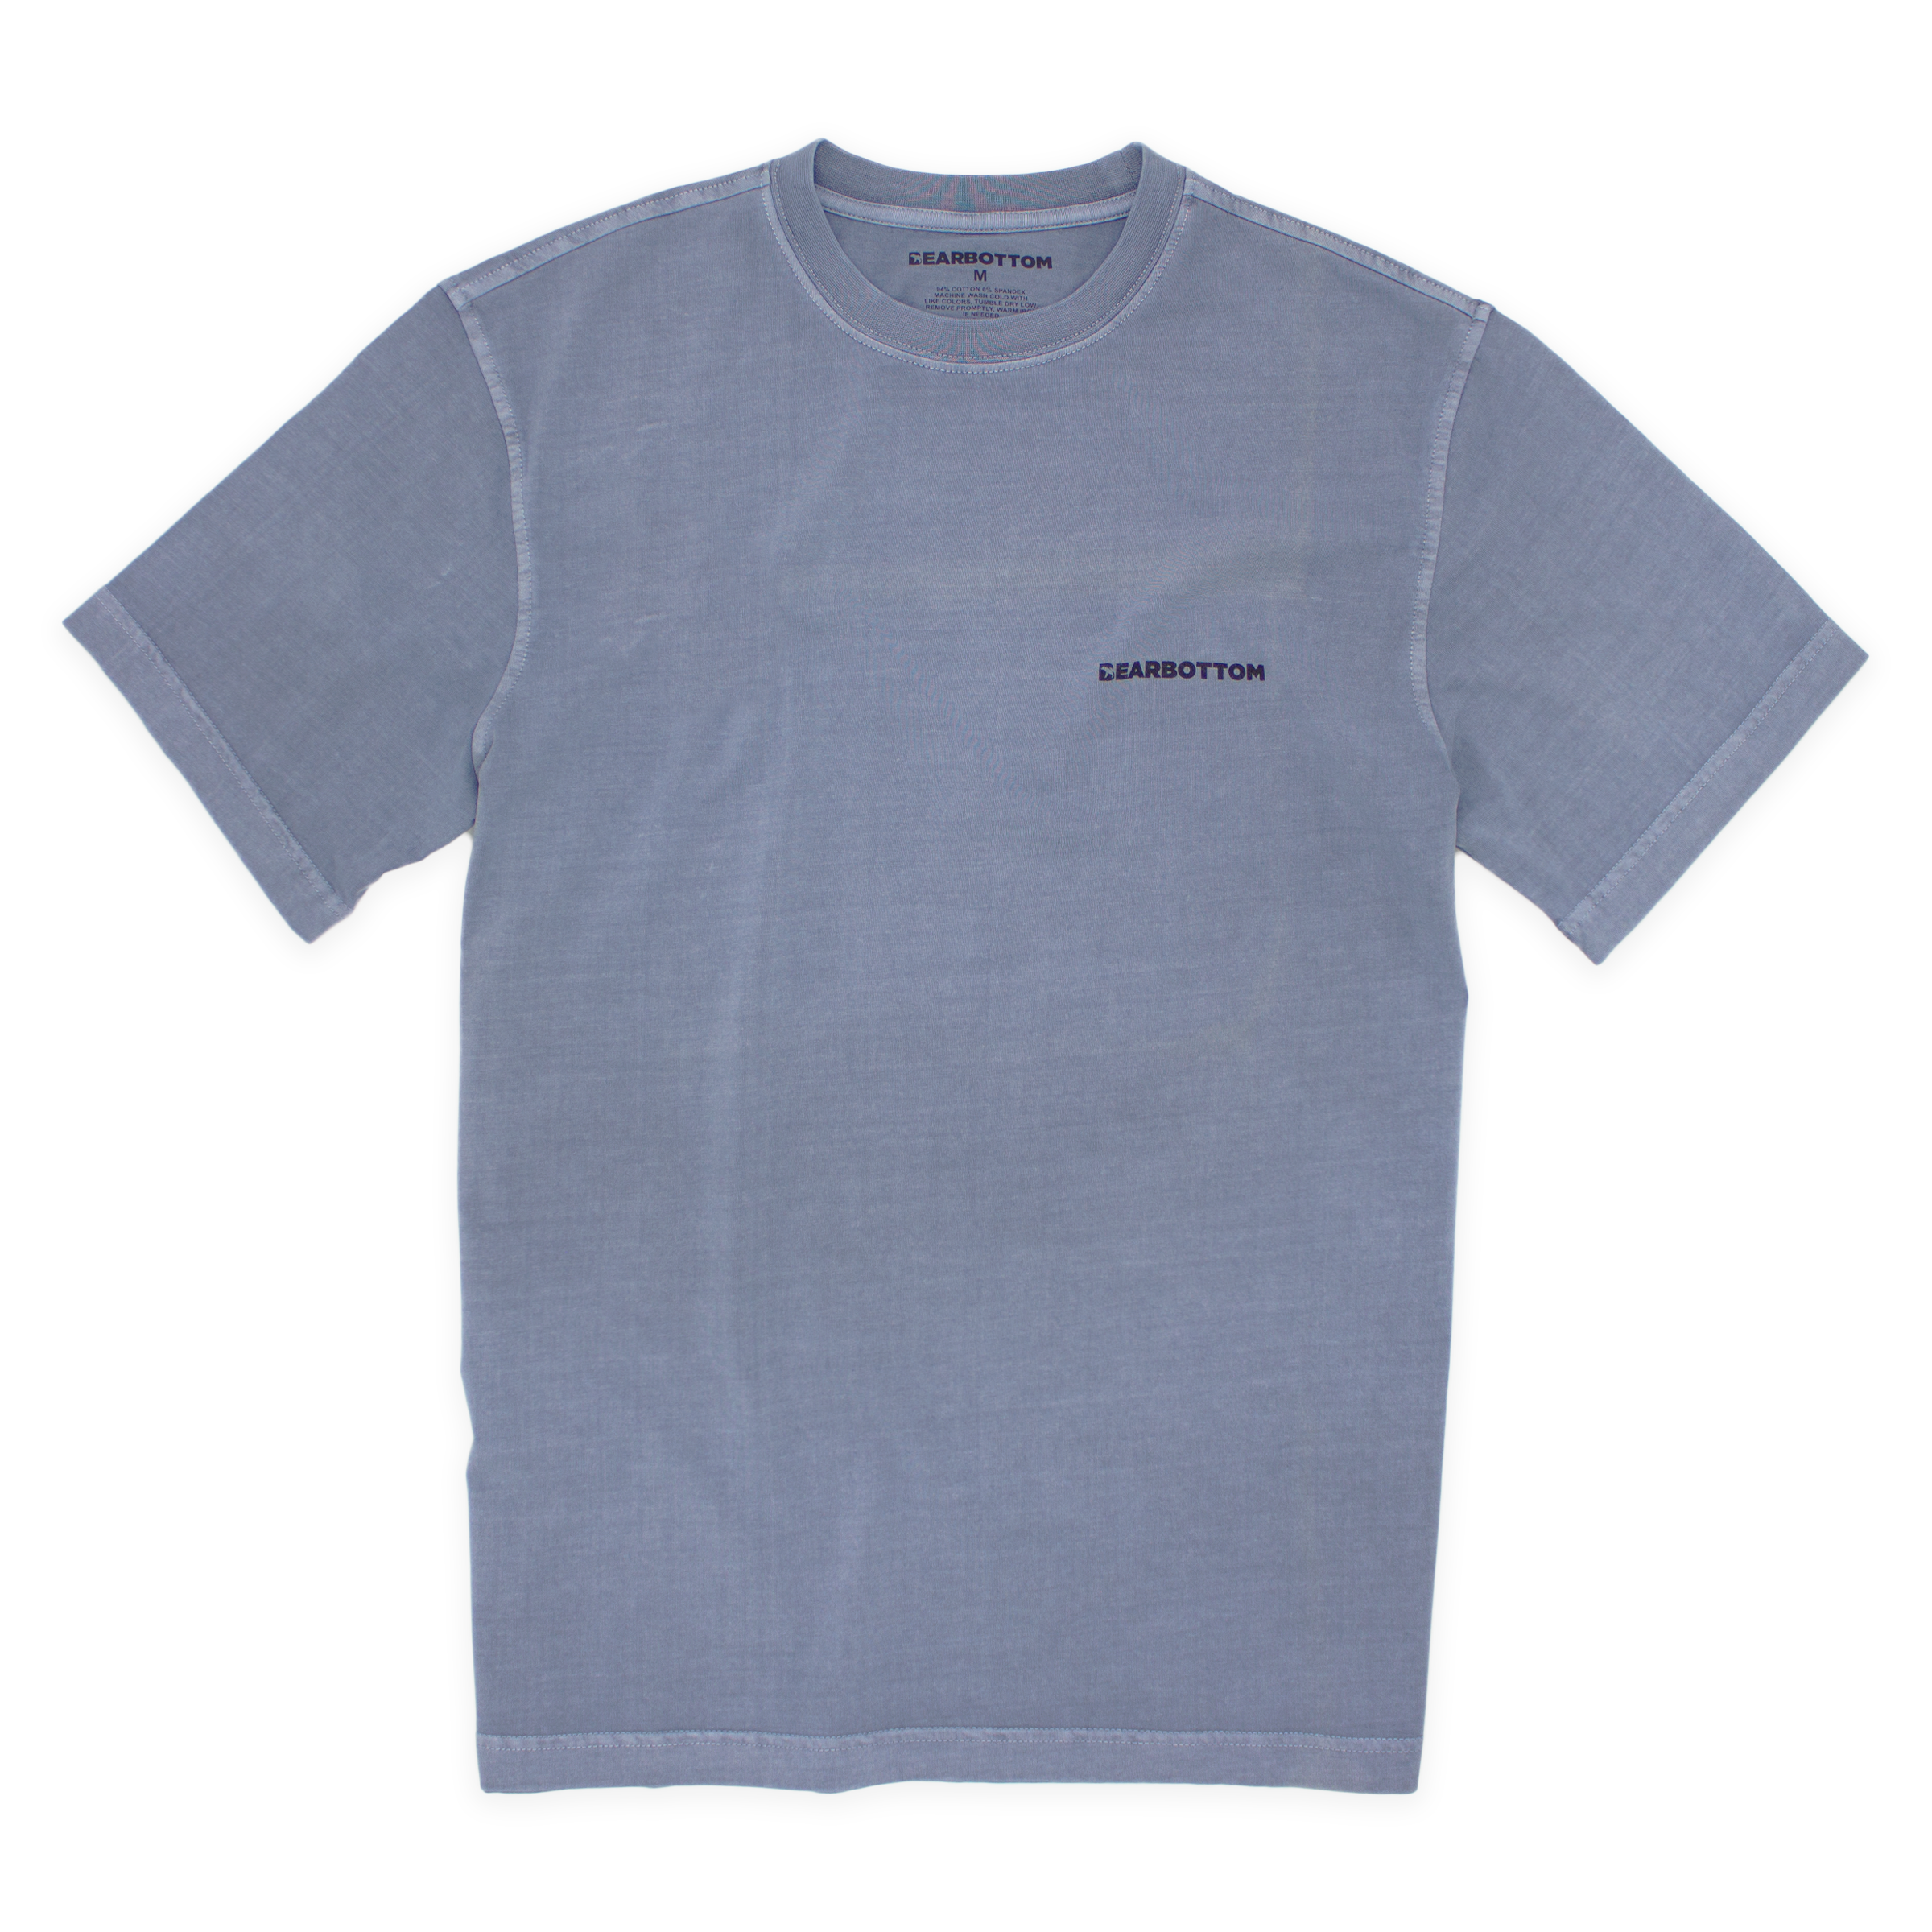 Natural Dye Logo Tee Ocean Front with crew neck, short sleeves, and Bearbottom logo printed on front left chest